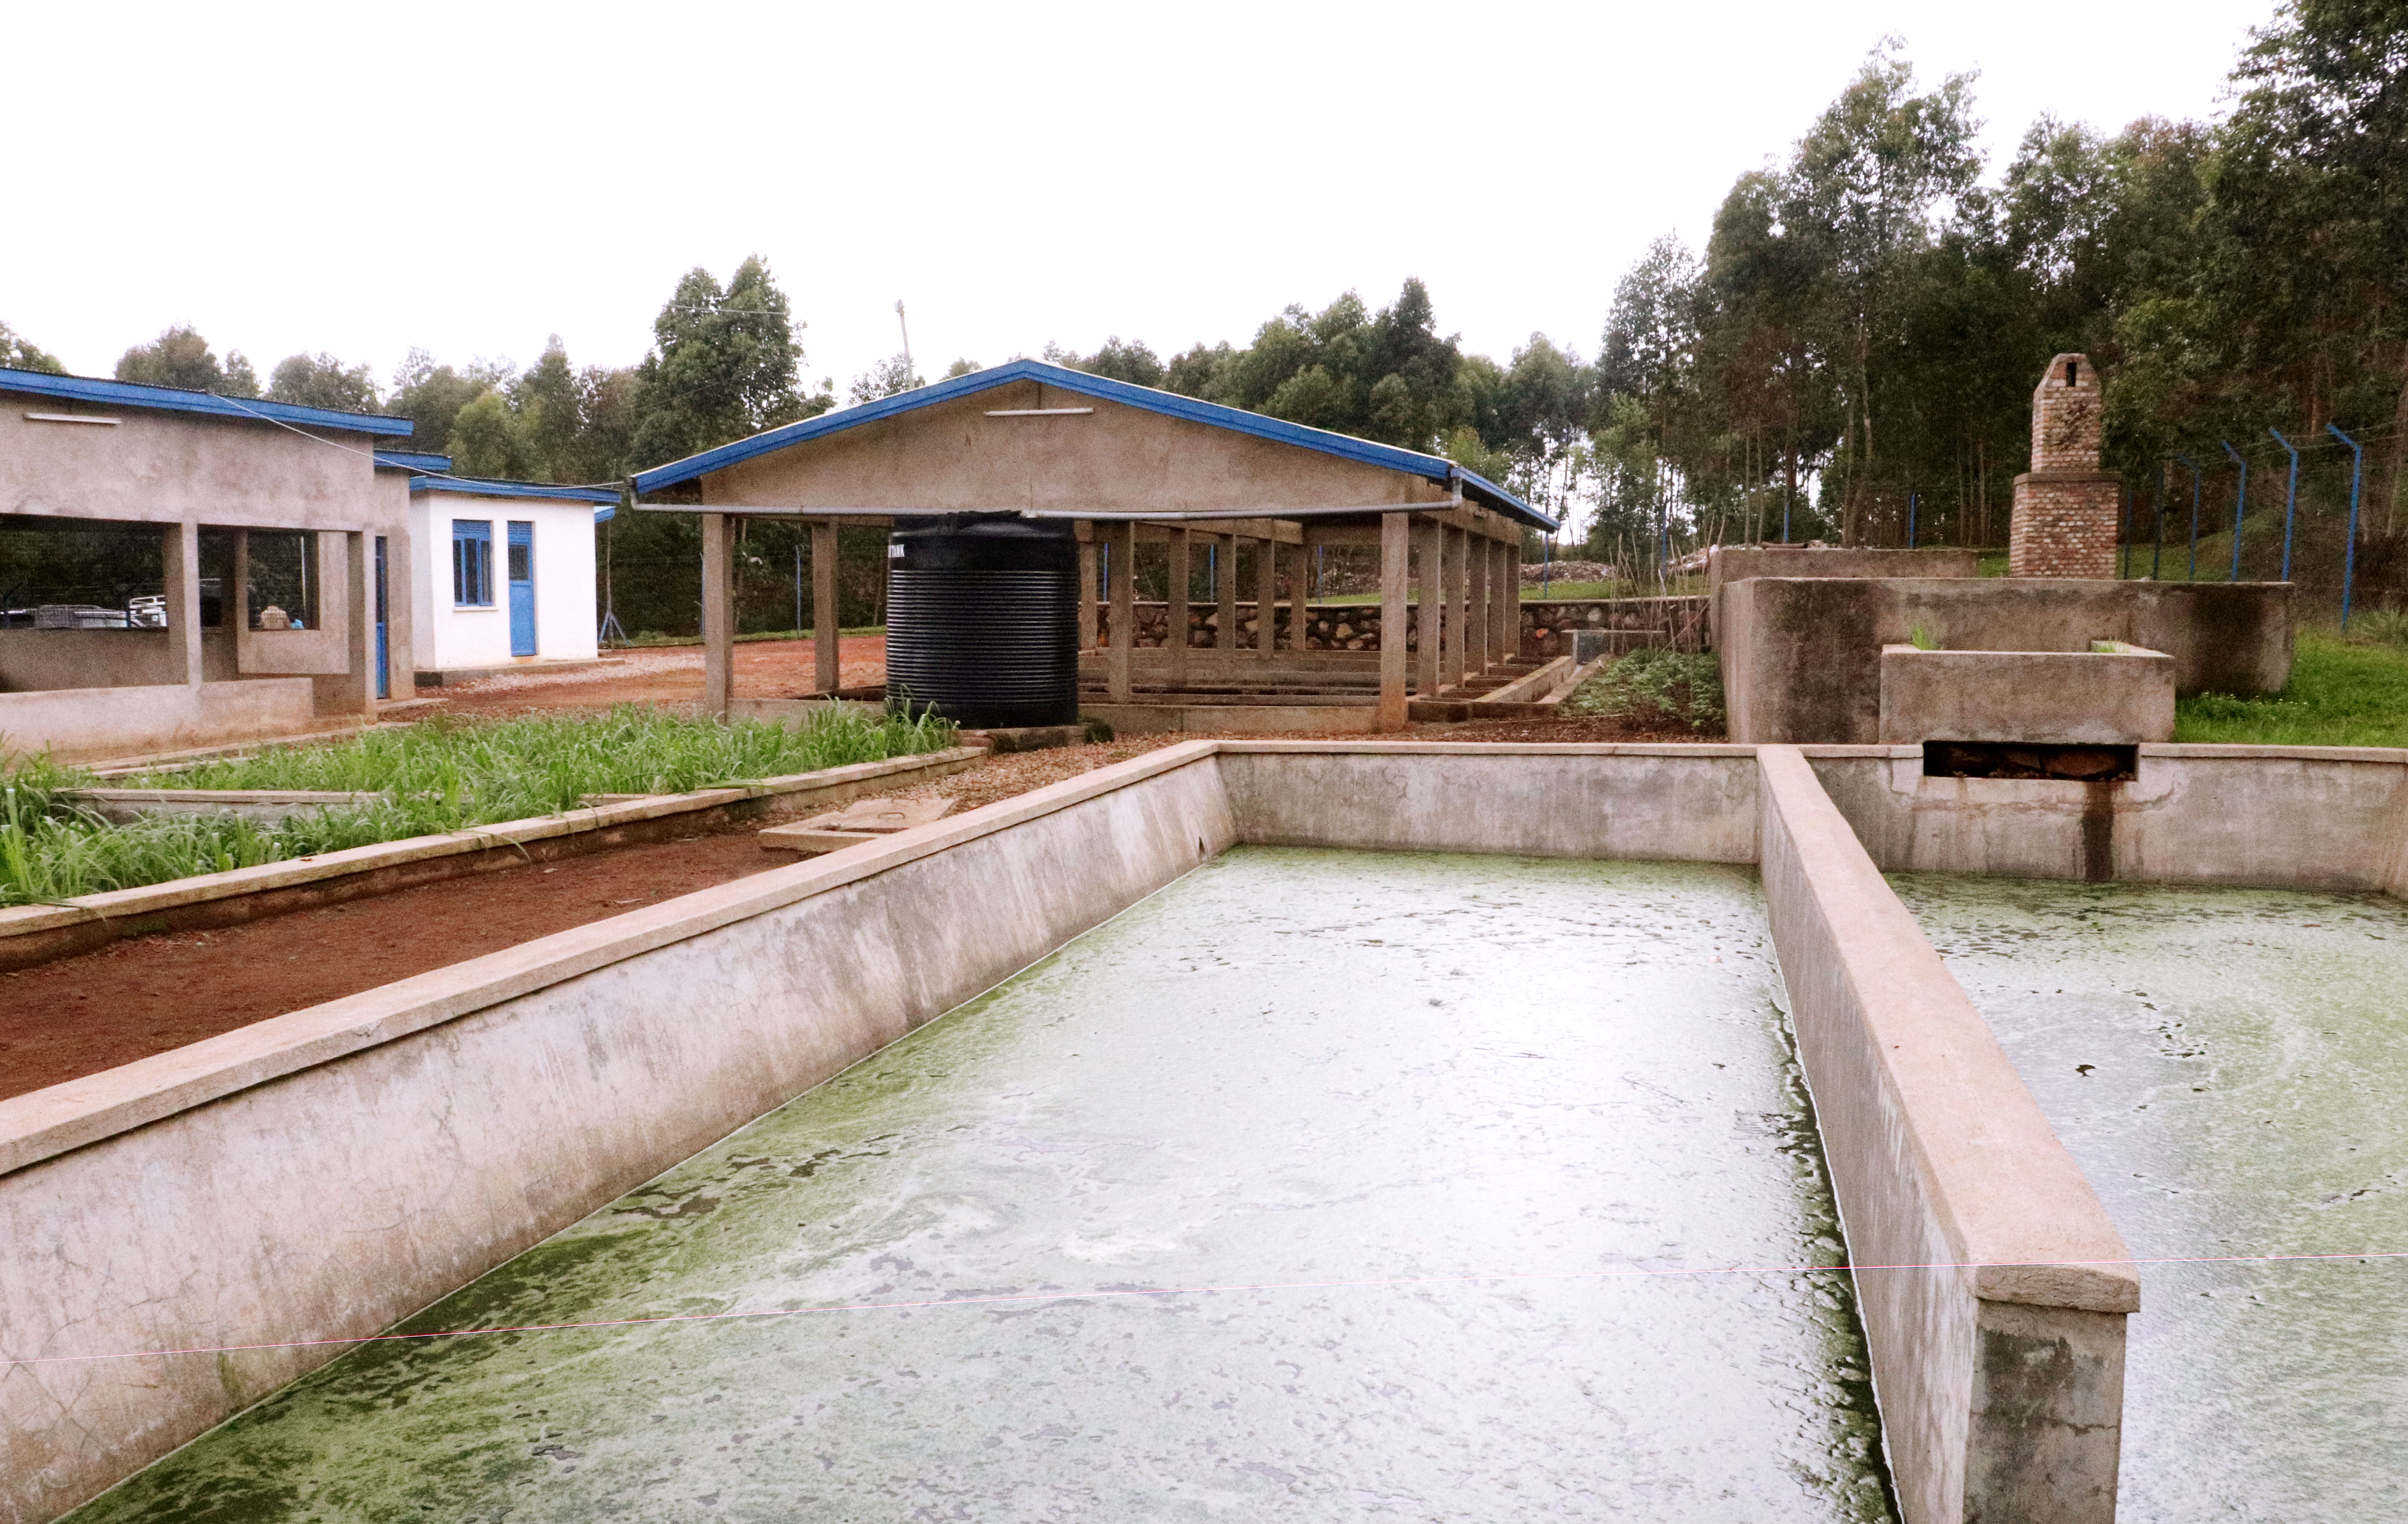 A section of the DEFAST plant which shows liquid waste under treatment at the plant in Gicumbi. Photo: WFP/Jean Pierre Bucyensenge